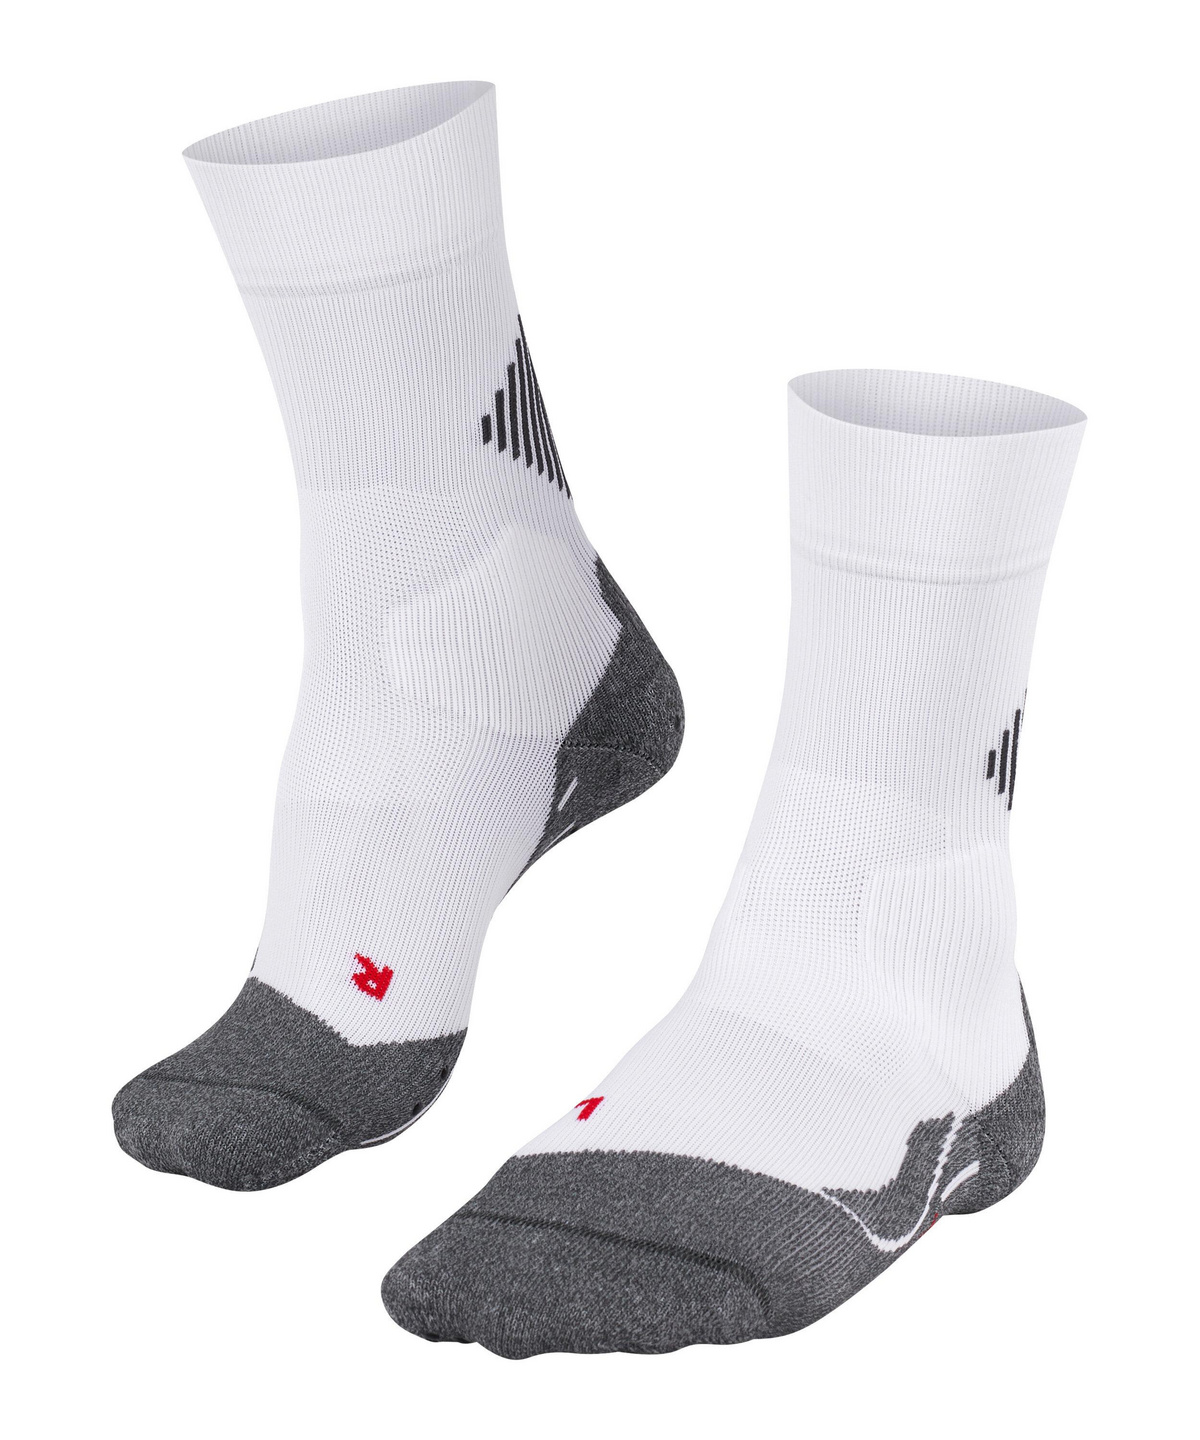 Falke 4 Grip Sports Sock  GADGETHEAD New Products Reviewed & Rated